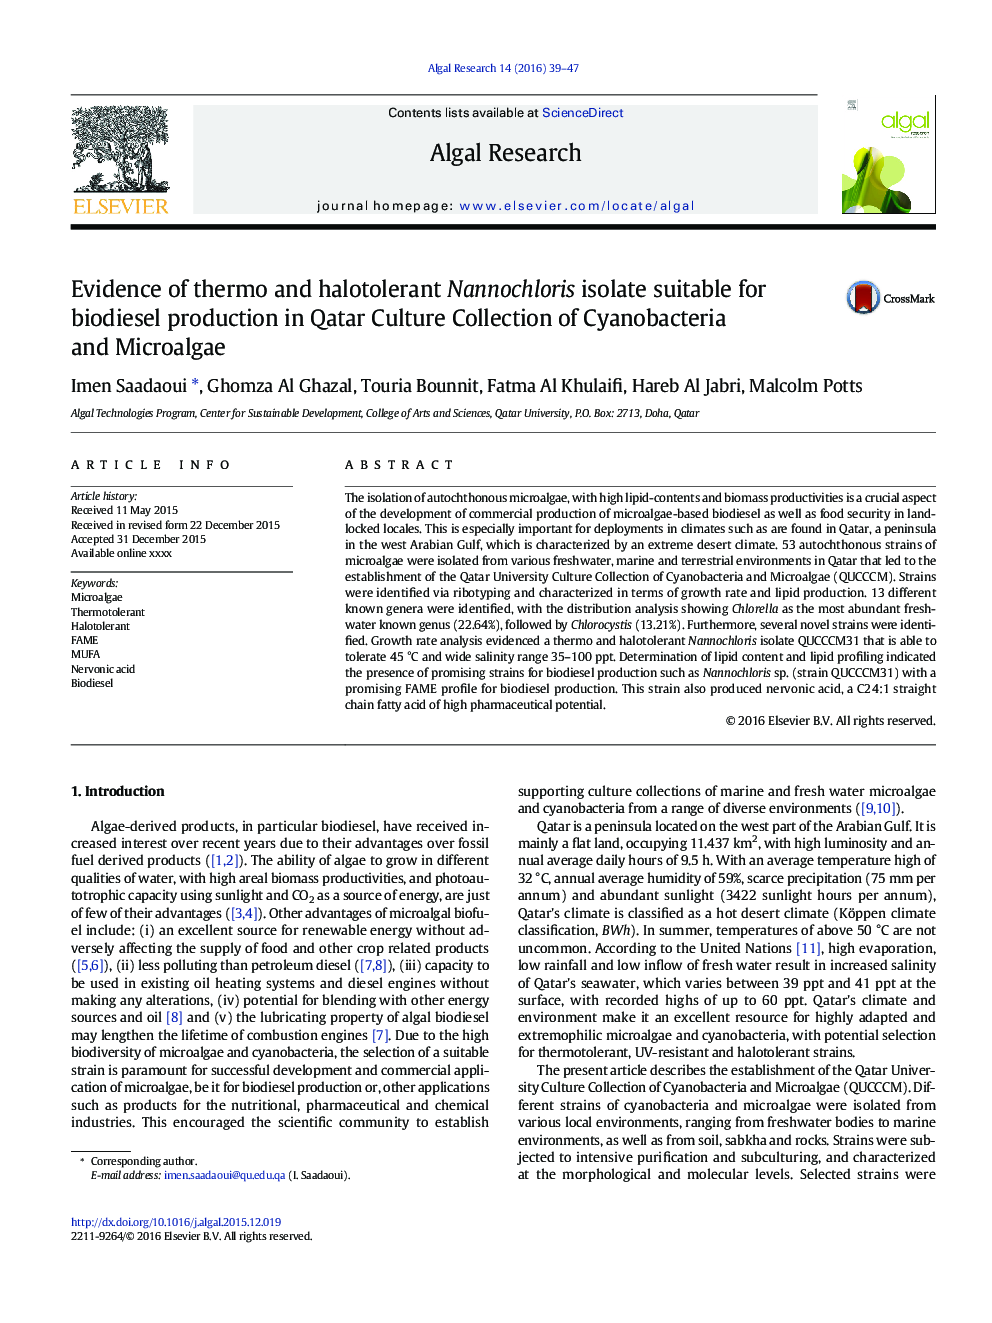 Evidence of thermo and halotolerant Nannochloris isolate suitable for biodiesel production in Qatar Culture Collection of Cyanobacteria and Microalgae